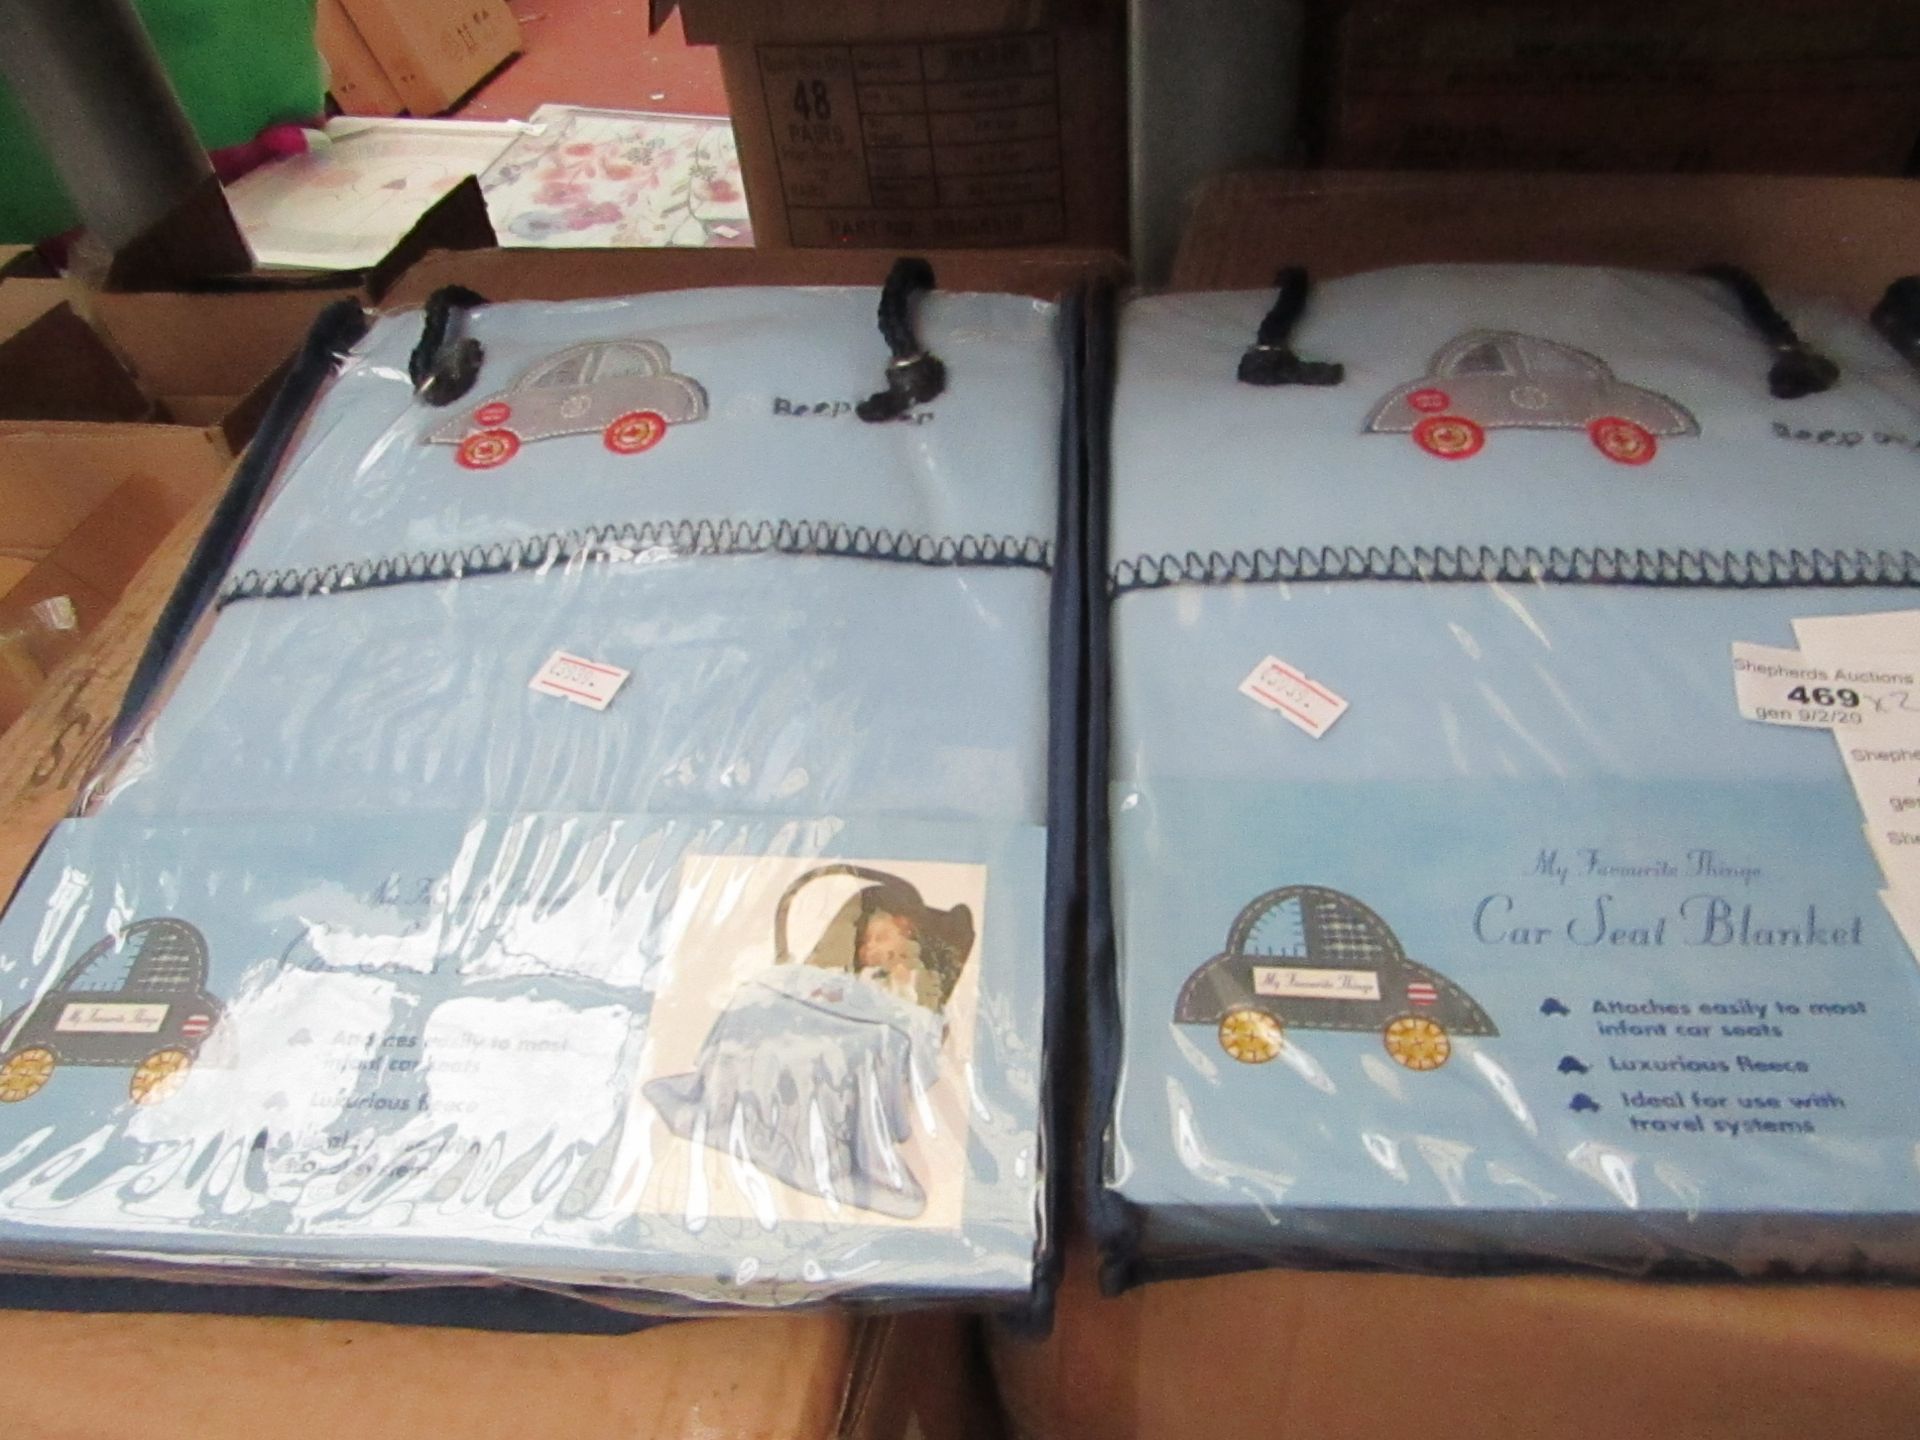 2 x Car Seat Blankets. New & packaged. Come in a carry bag